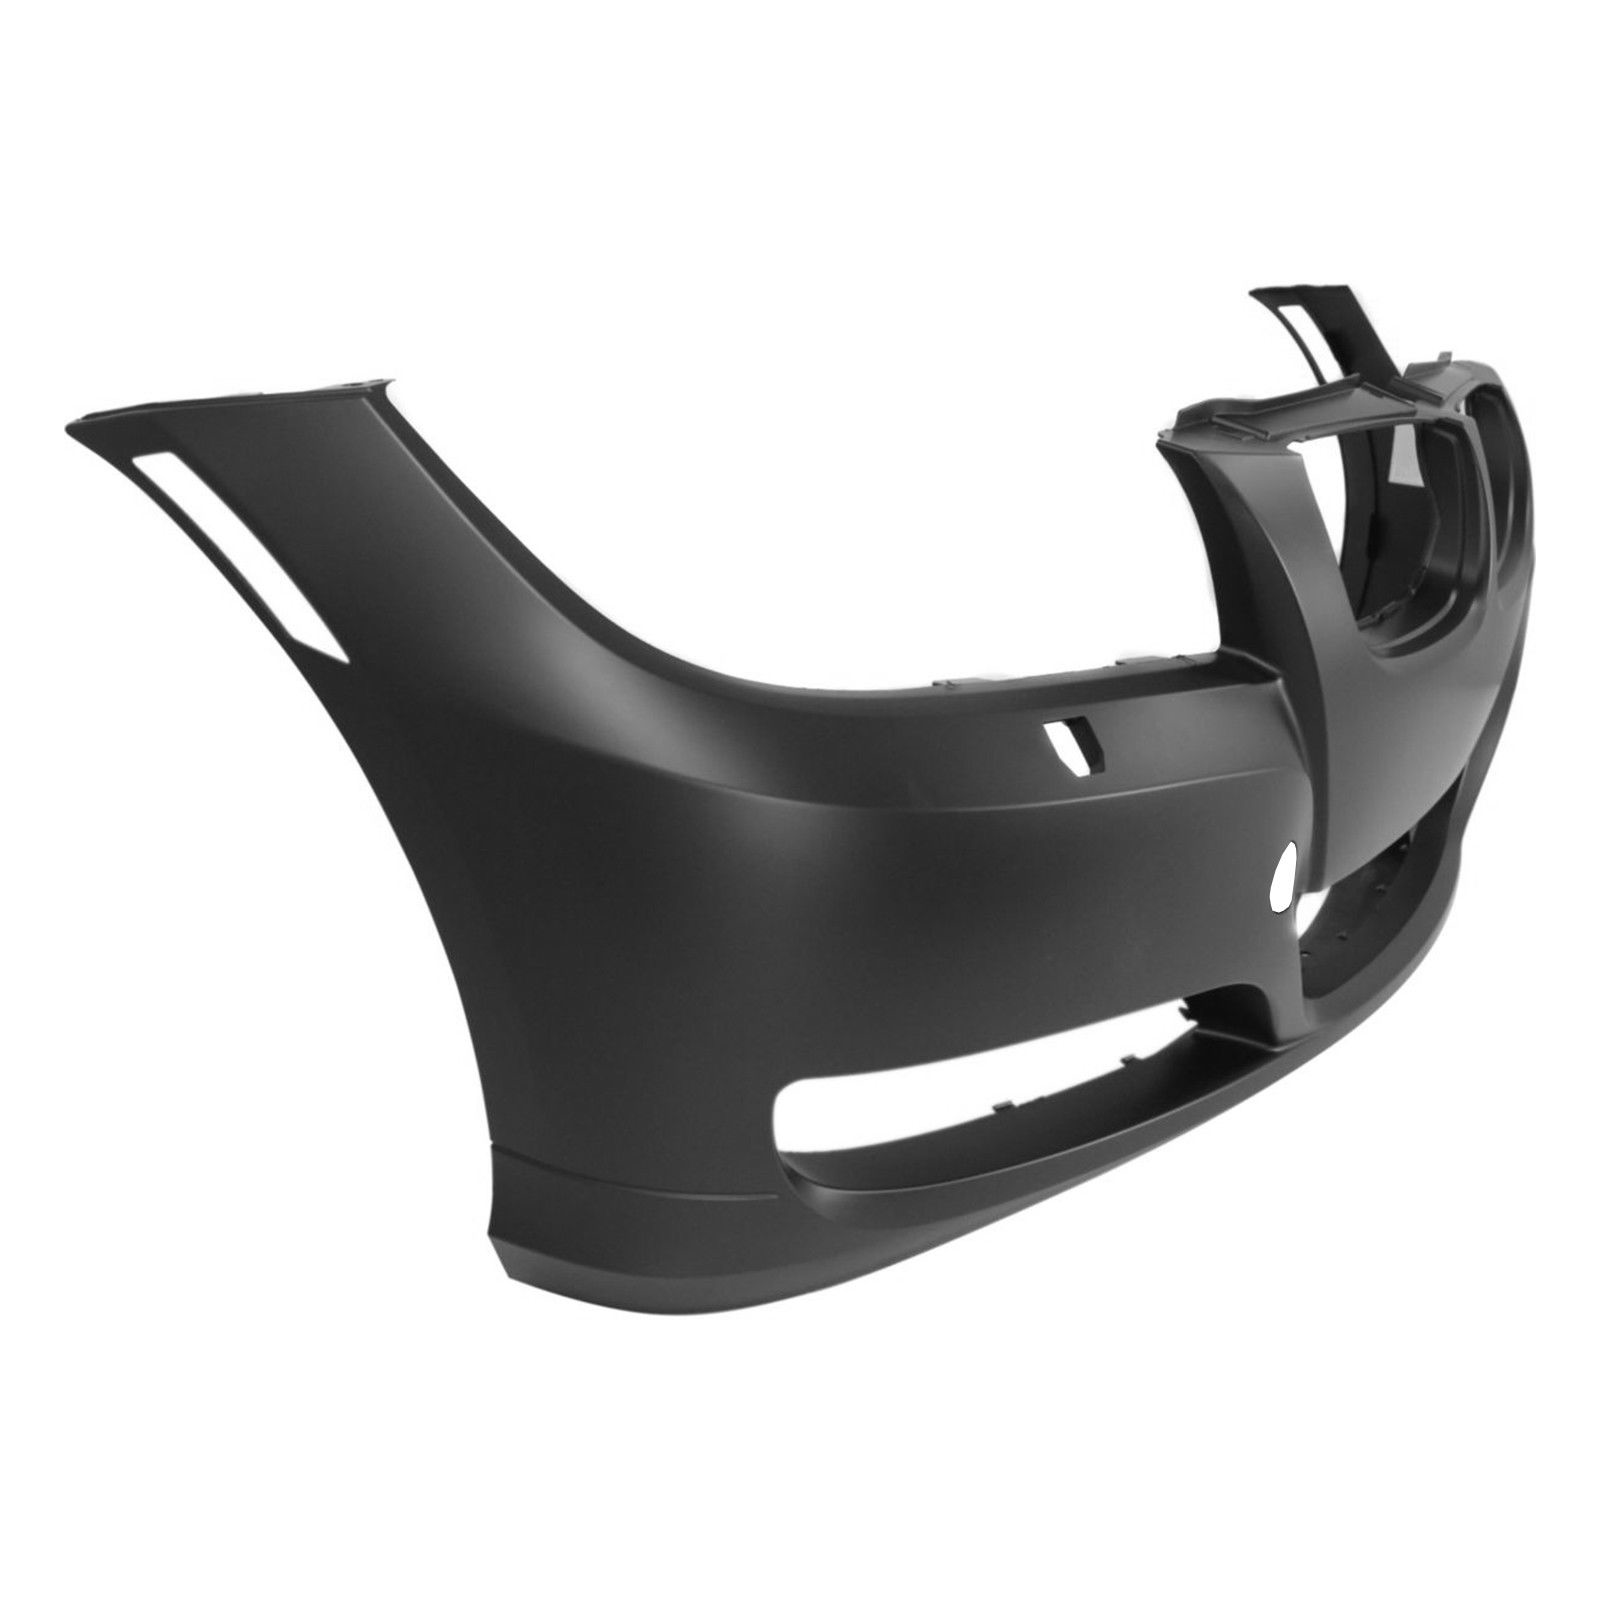 2009-2011 BMW 3-SERIES Front Bumper Cover E90/E91  Sedan/Wagon  w/o Park Distance Control  w/Headlamp Washer Painted to Match